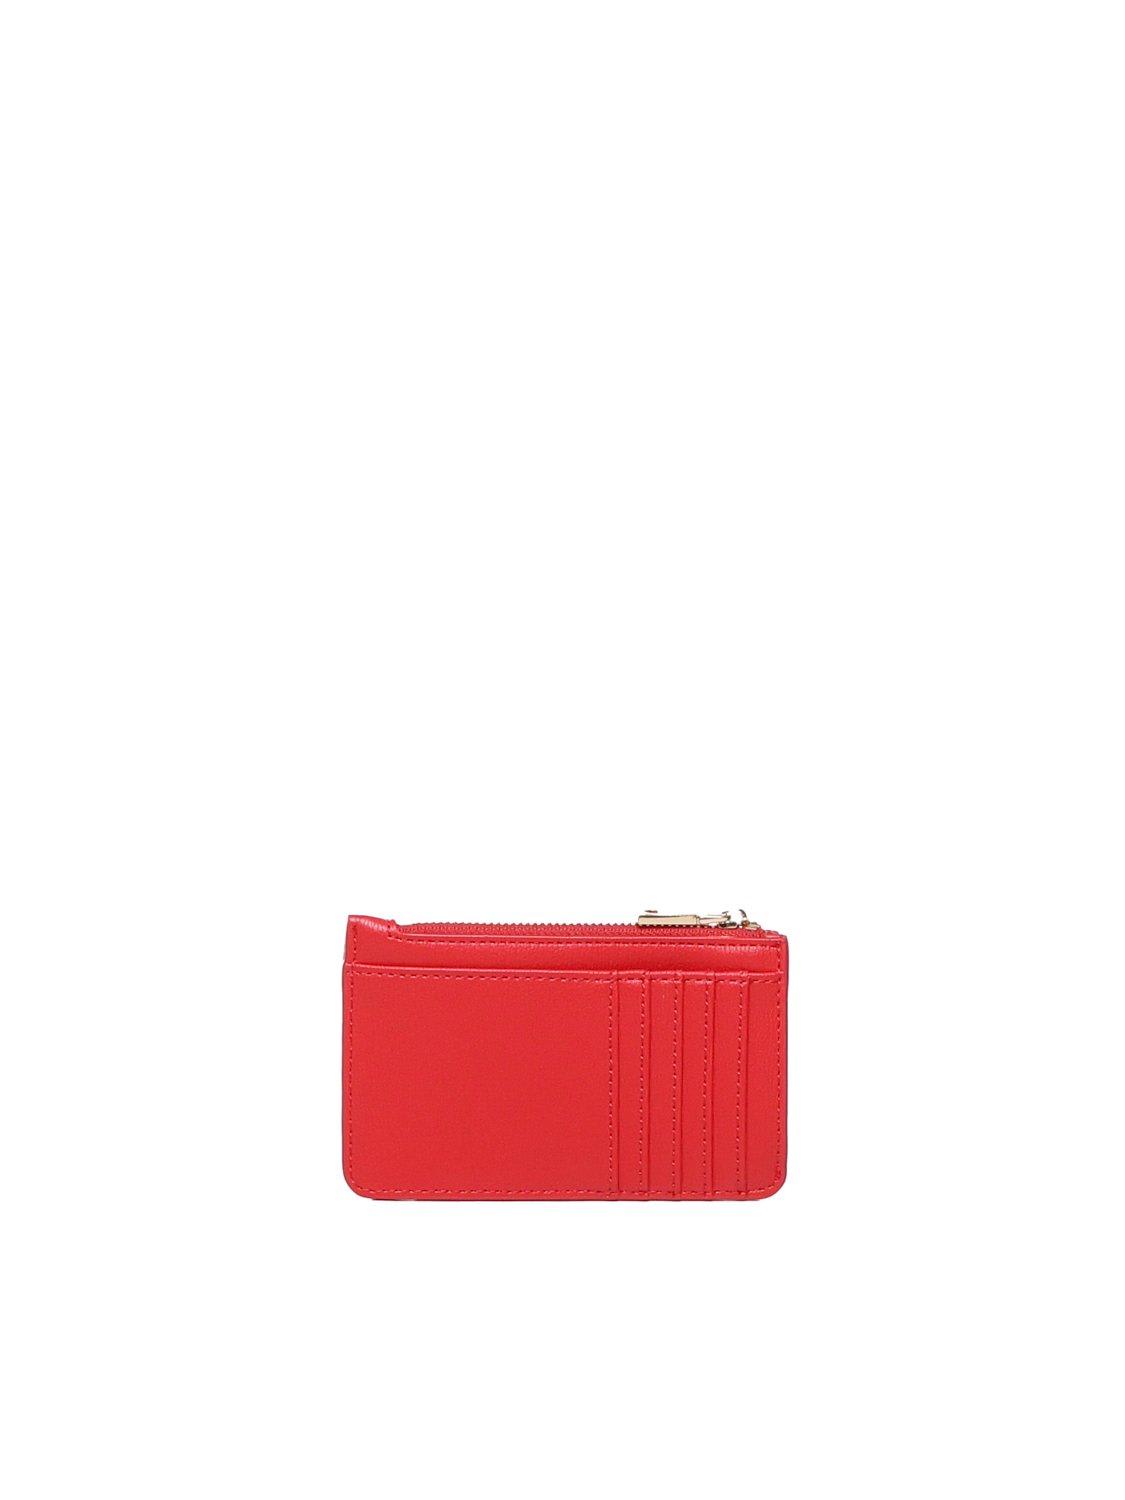 Shop Love Moschino Logo Lettering Zipped Wallet In Red